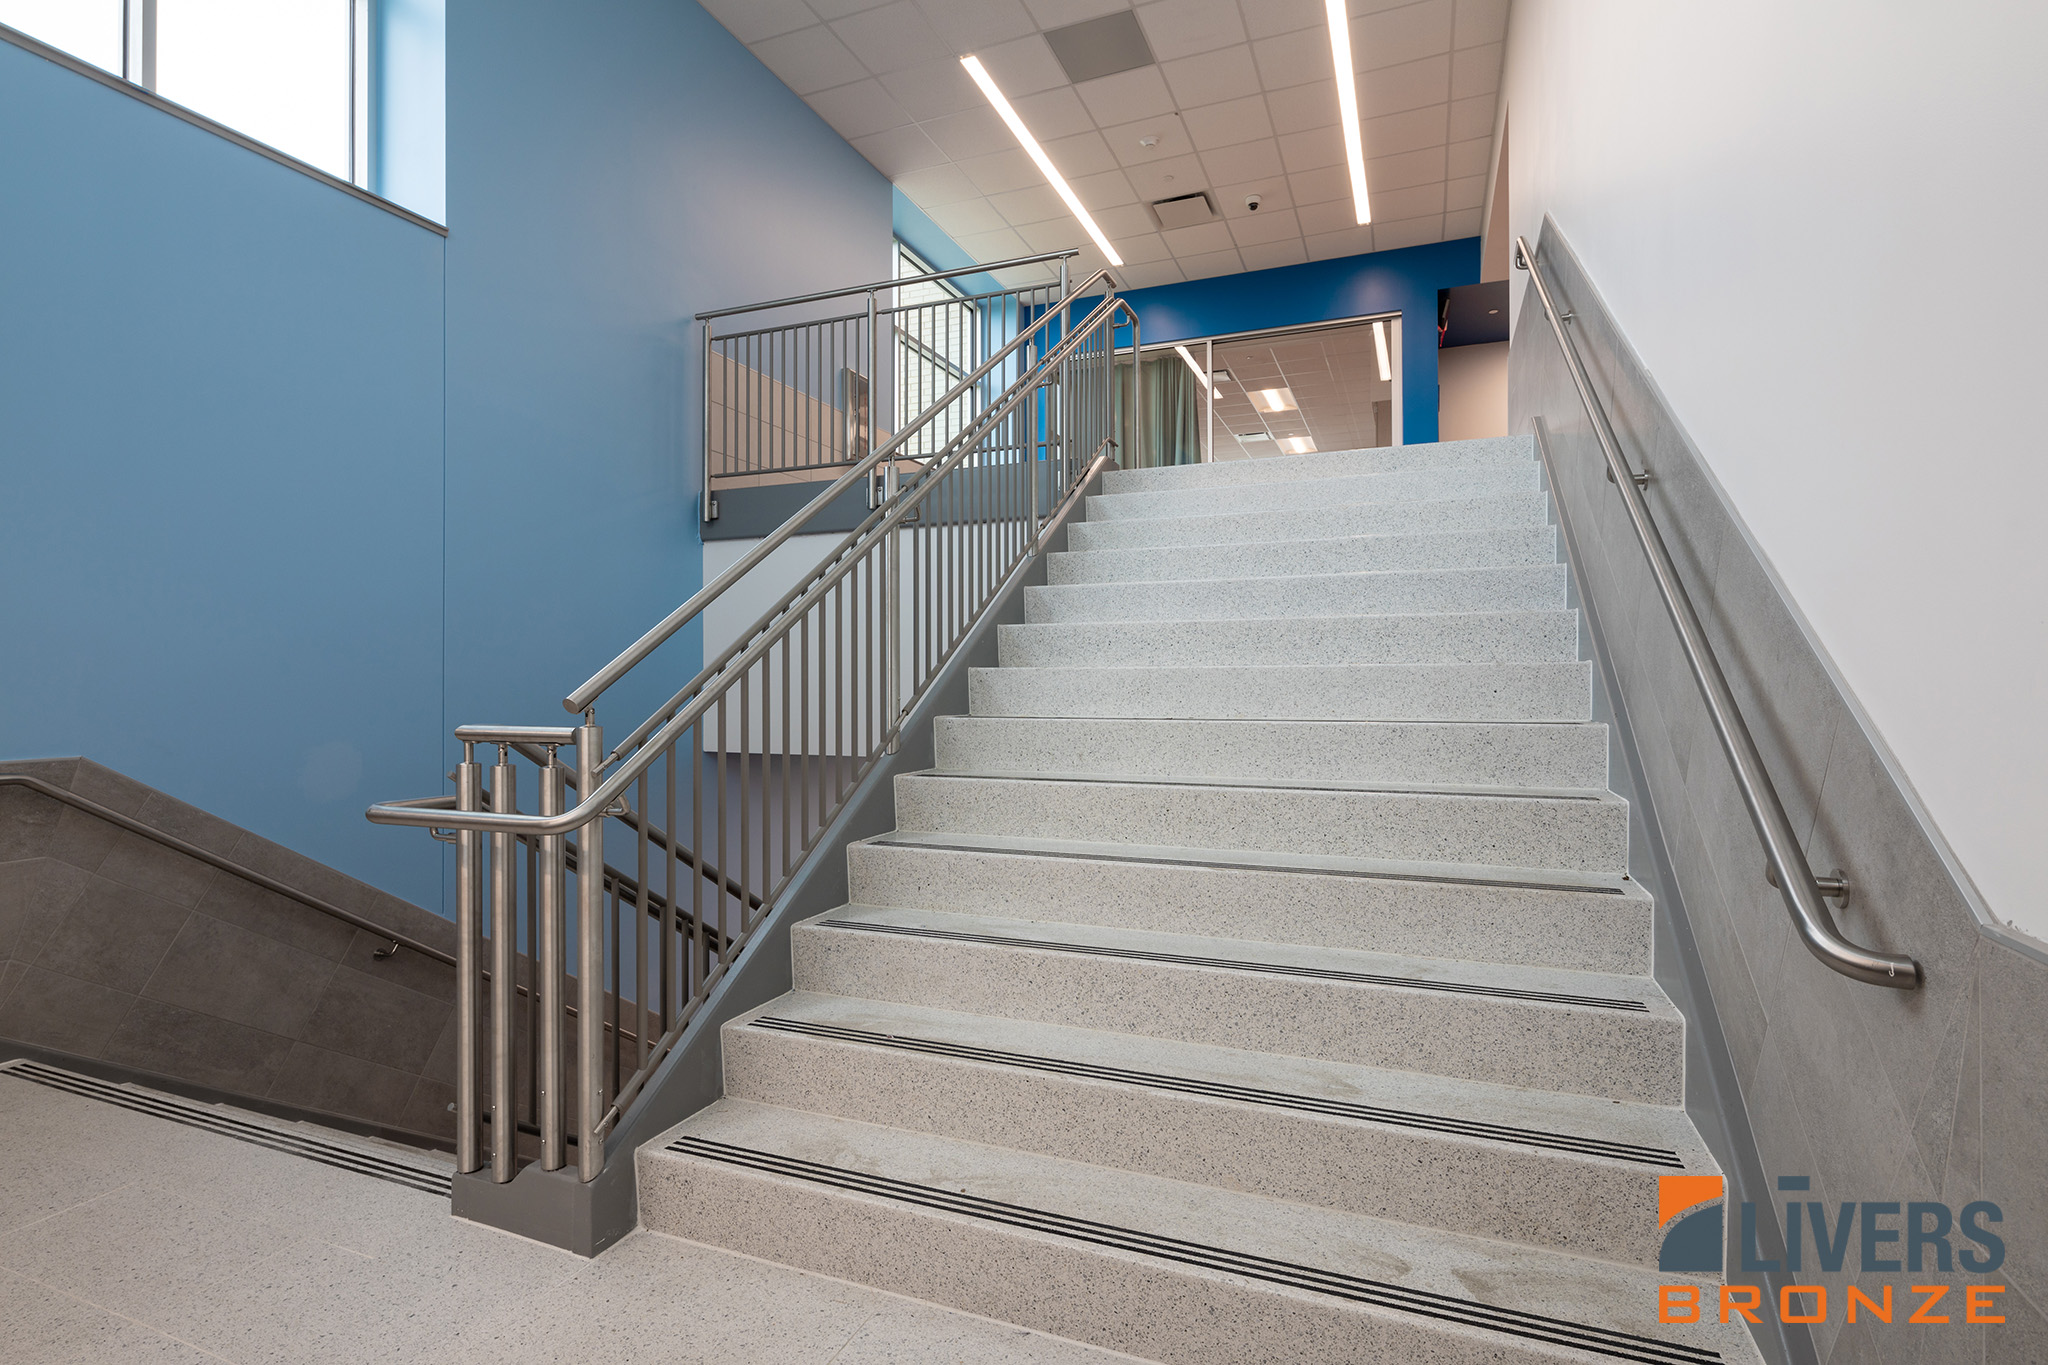 Livers Bronze Mirage with Stainless Steel Picket Railings were installed in the interior stairway at Red Bud Elementary School, Austin, Texas, and are Made in the USA.